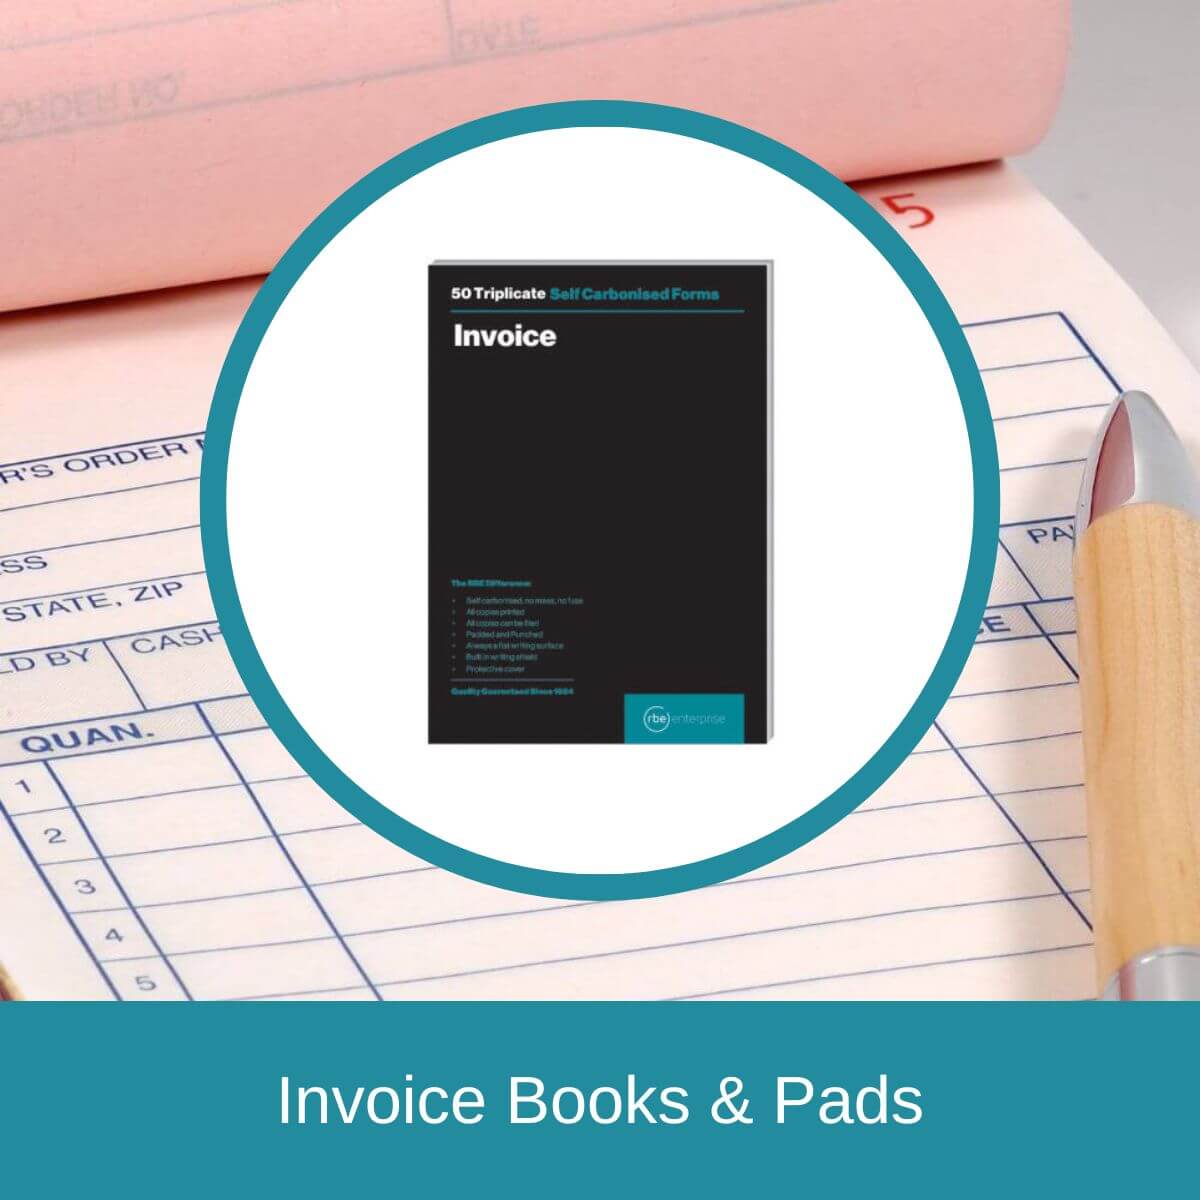 Invoice Books & Pads Product Options